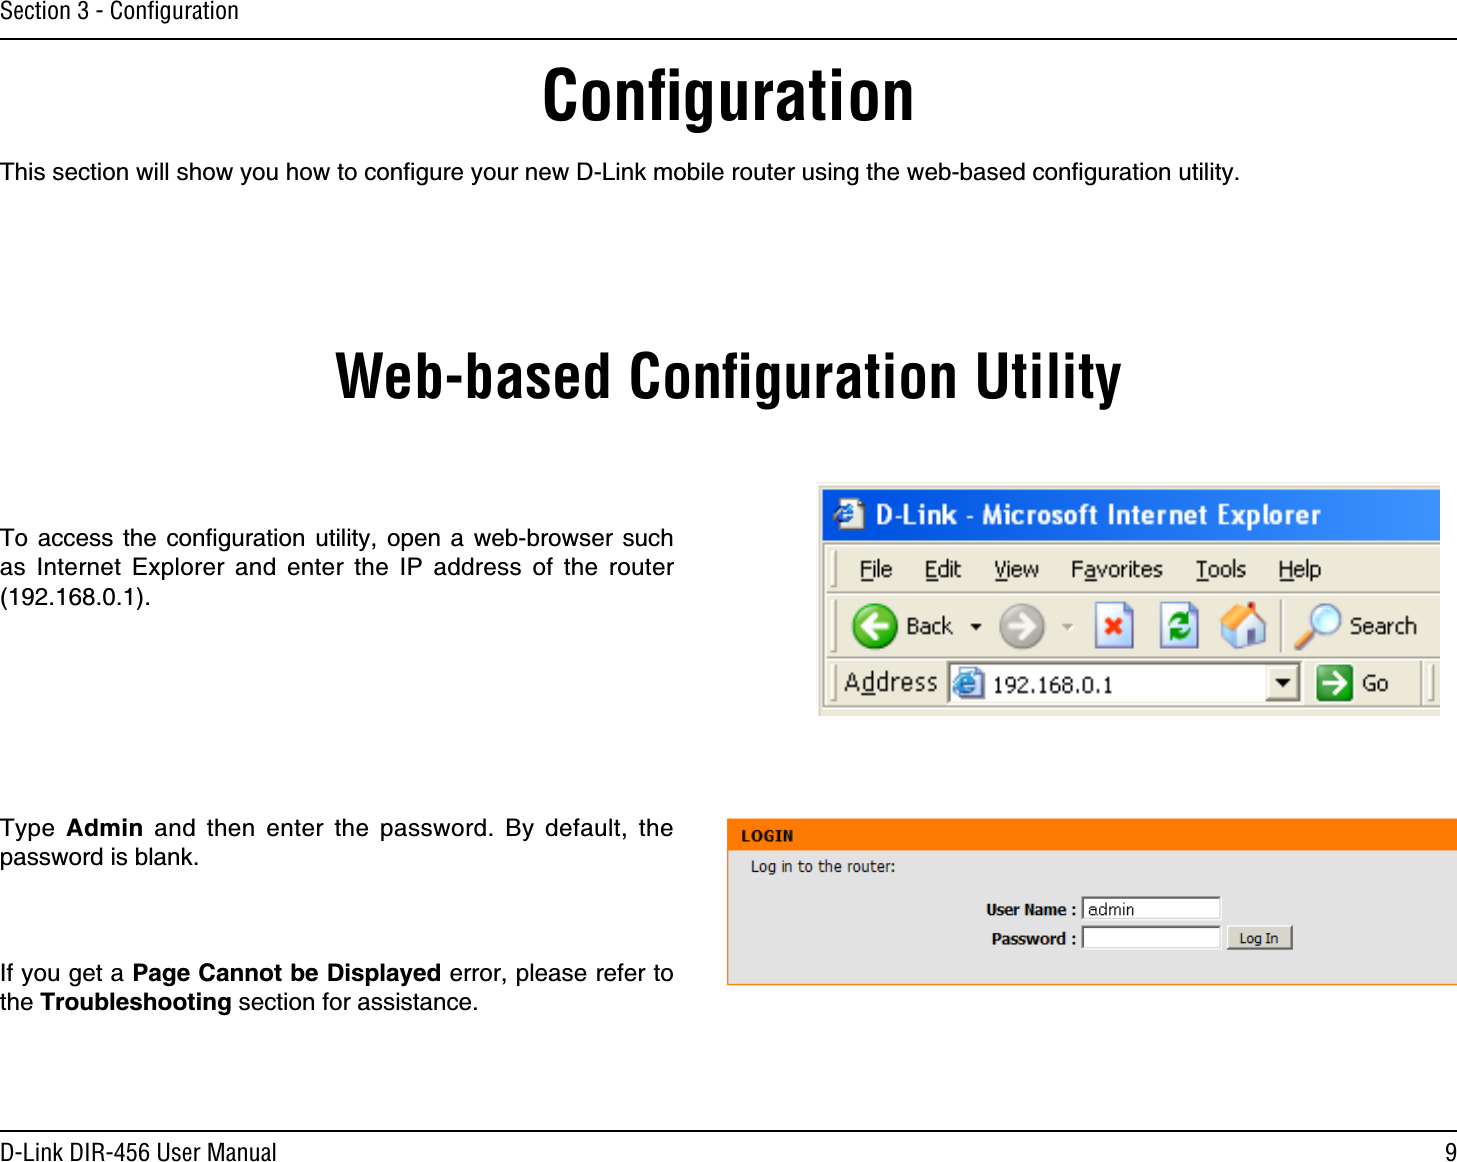 9D-Link DIR-456 User ManualSection 3 - ConﬁgurationConﬁgurationThis section will show you how to conﬁgure your new D-Link mobile router using the web-based conﬁguration utility.Web-based Conﬁguration UtilityTo access the conﬁguration utility, open a web-browser such as Internet Explorer and enter the IP address of the router (192.168.0.1).Type  Admin and then enter the password. By default, the password is blank.If you get a Page Cannot be Displayed error, please refer to the Troubleshooting section for assistance.